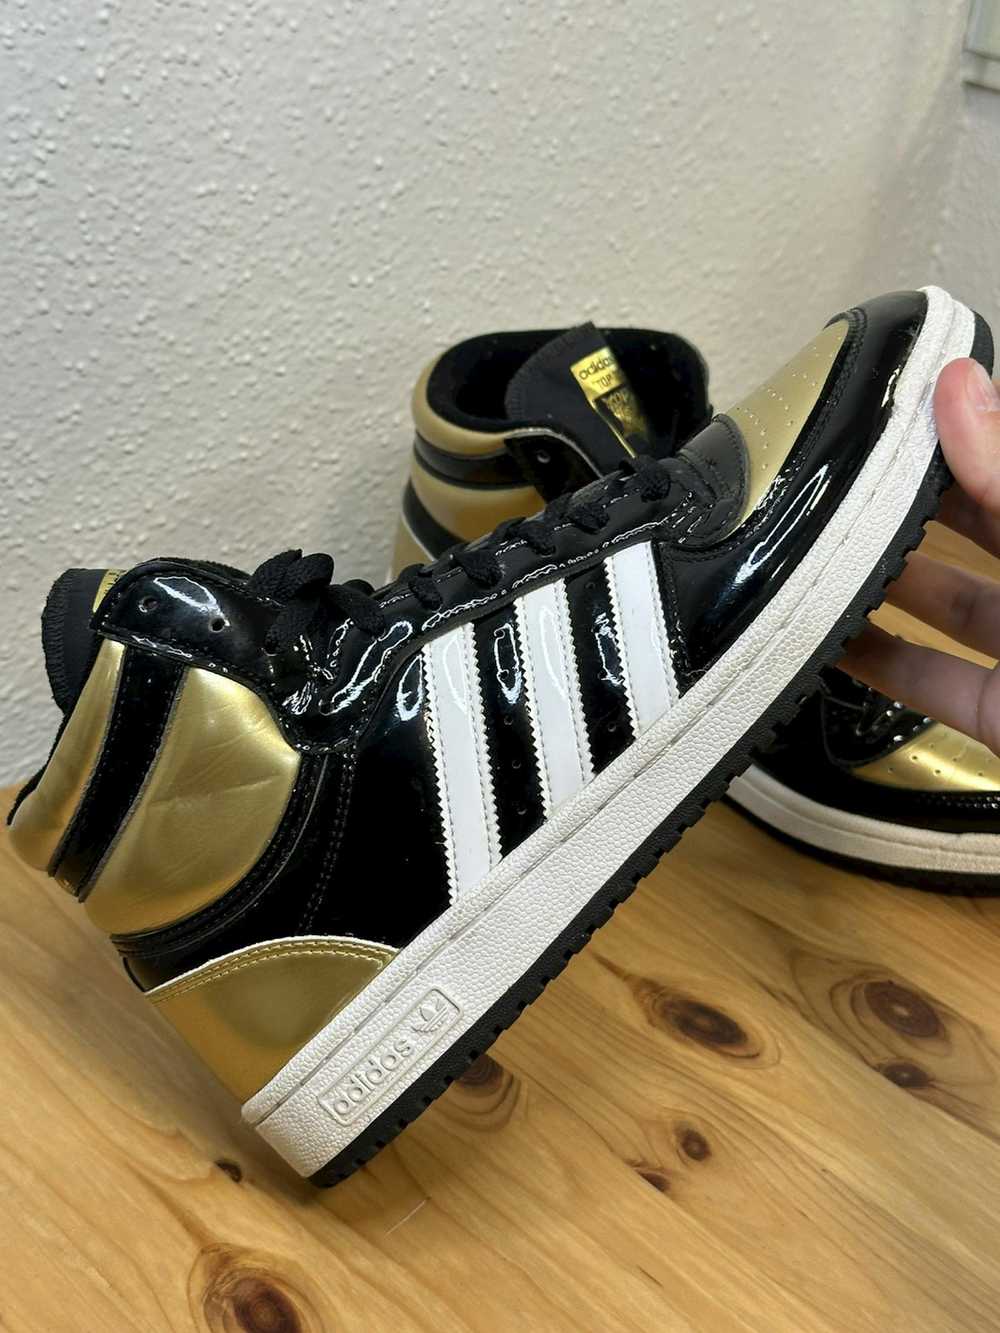 Adidas Top Ten RB Black Gold Patent size 9 - image 2